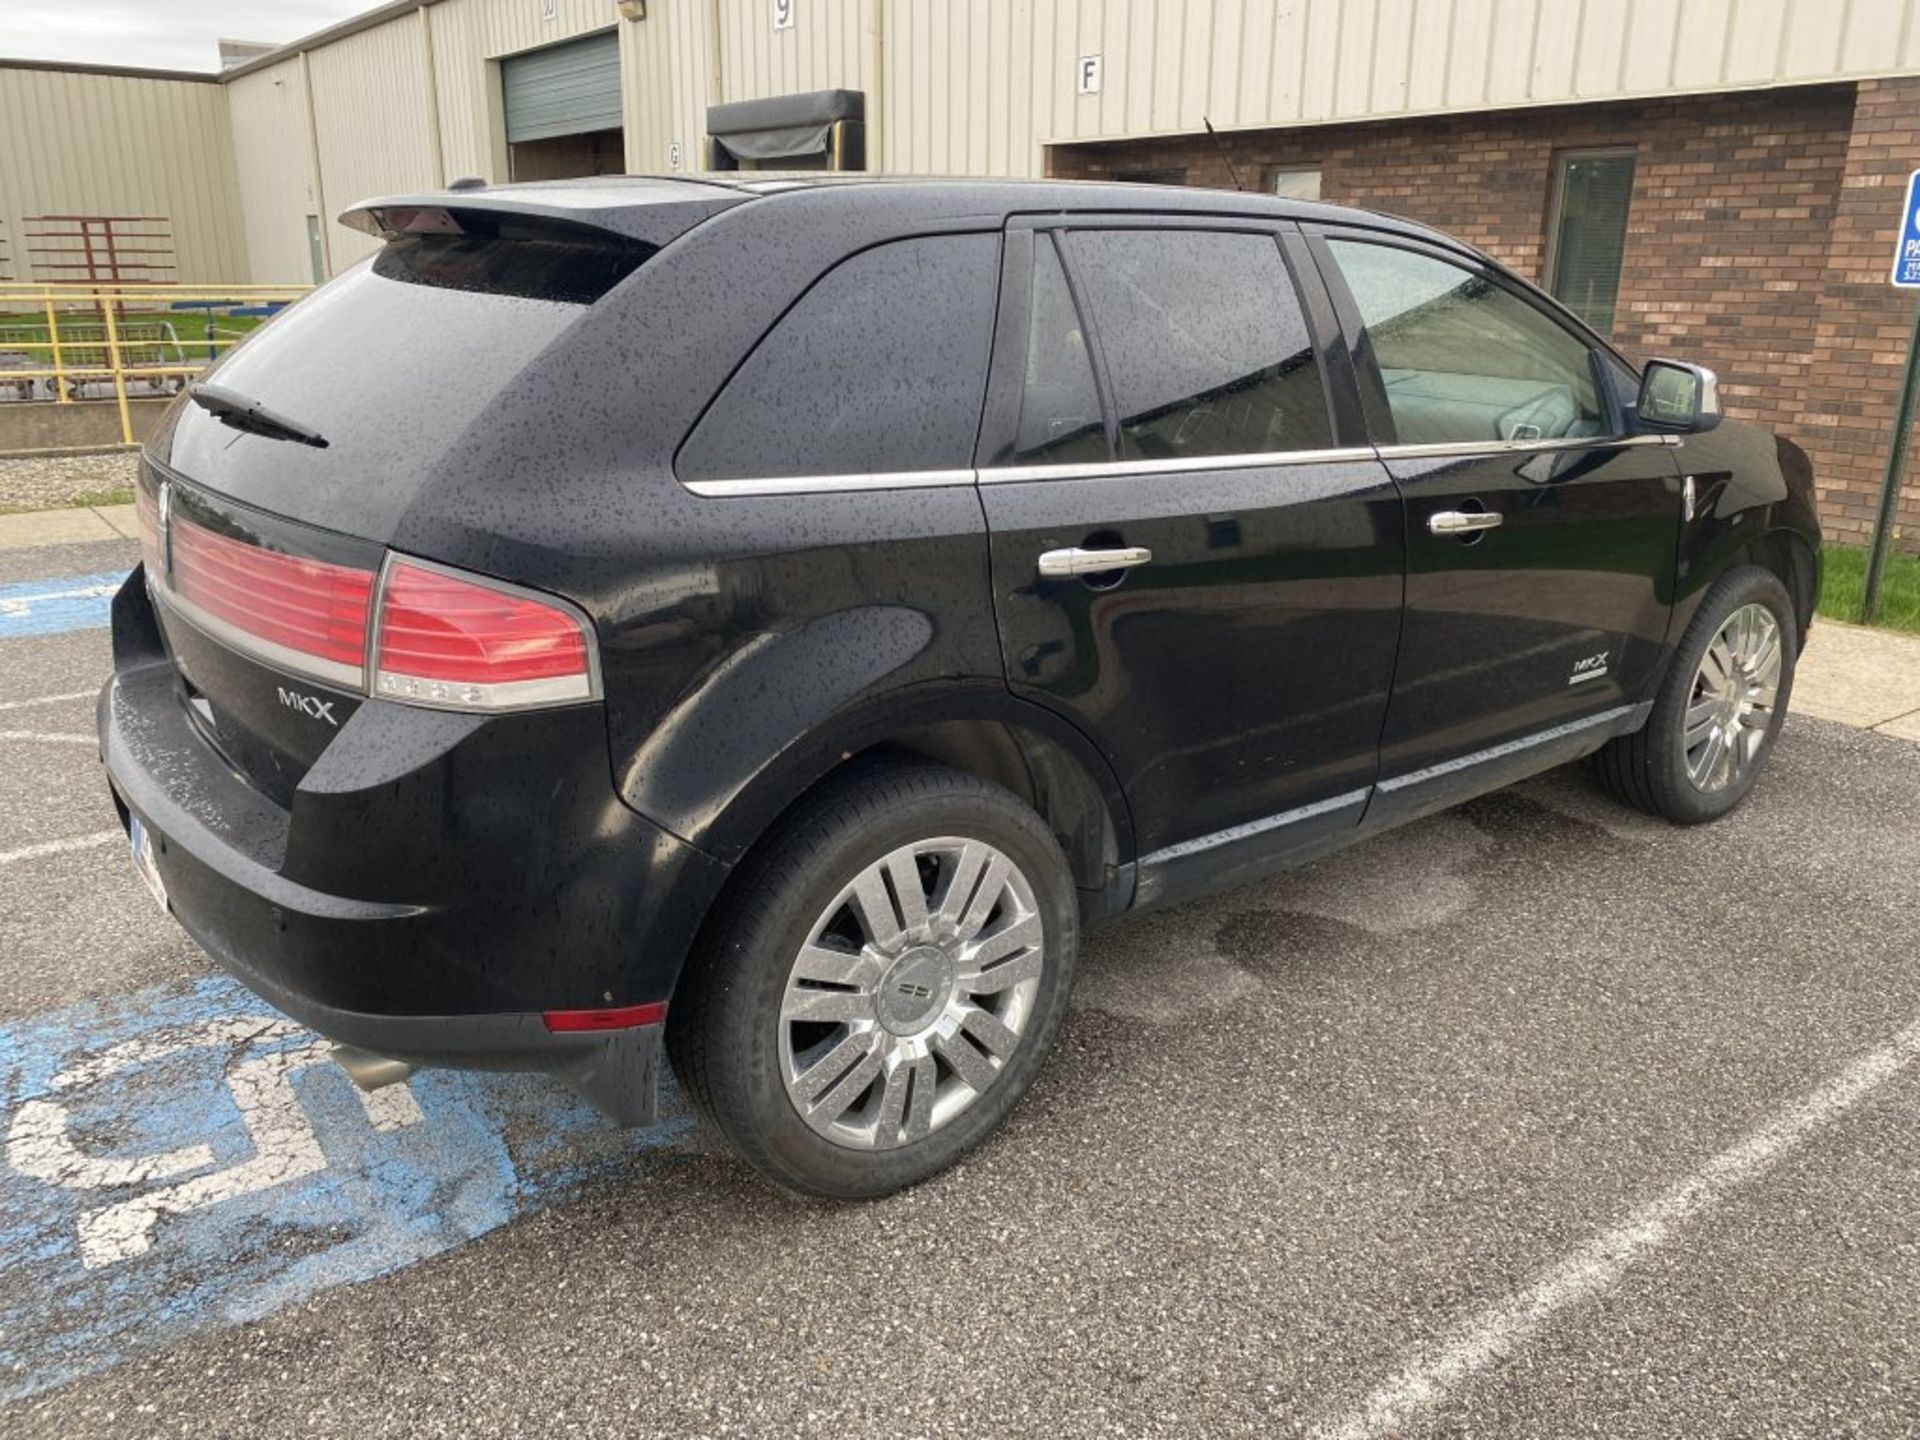 2008 LINCOLN MKX LIMITED EDITION, AUTO TRANS, AM/FM-CD-AUX, HEAT/AC SEATS, MOONROOF, PW, PL, - Image 5 of 21